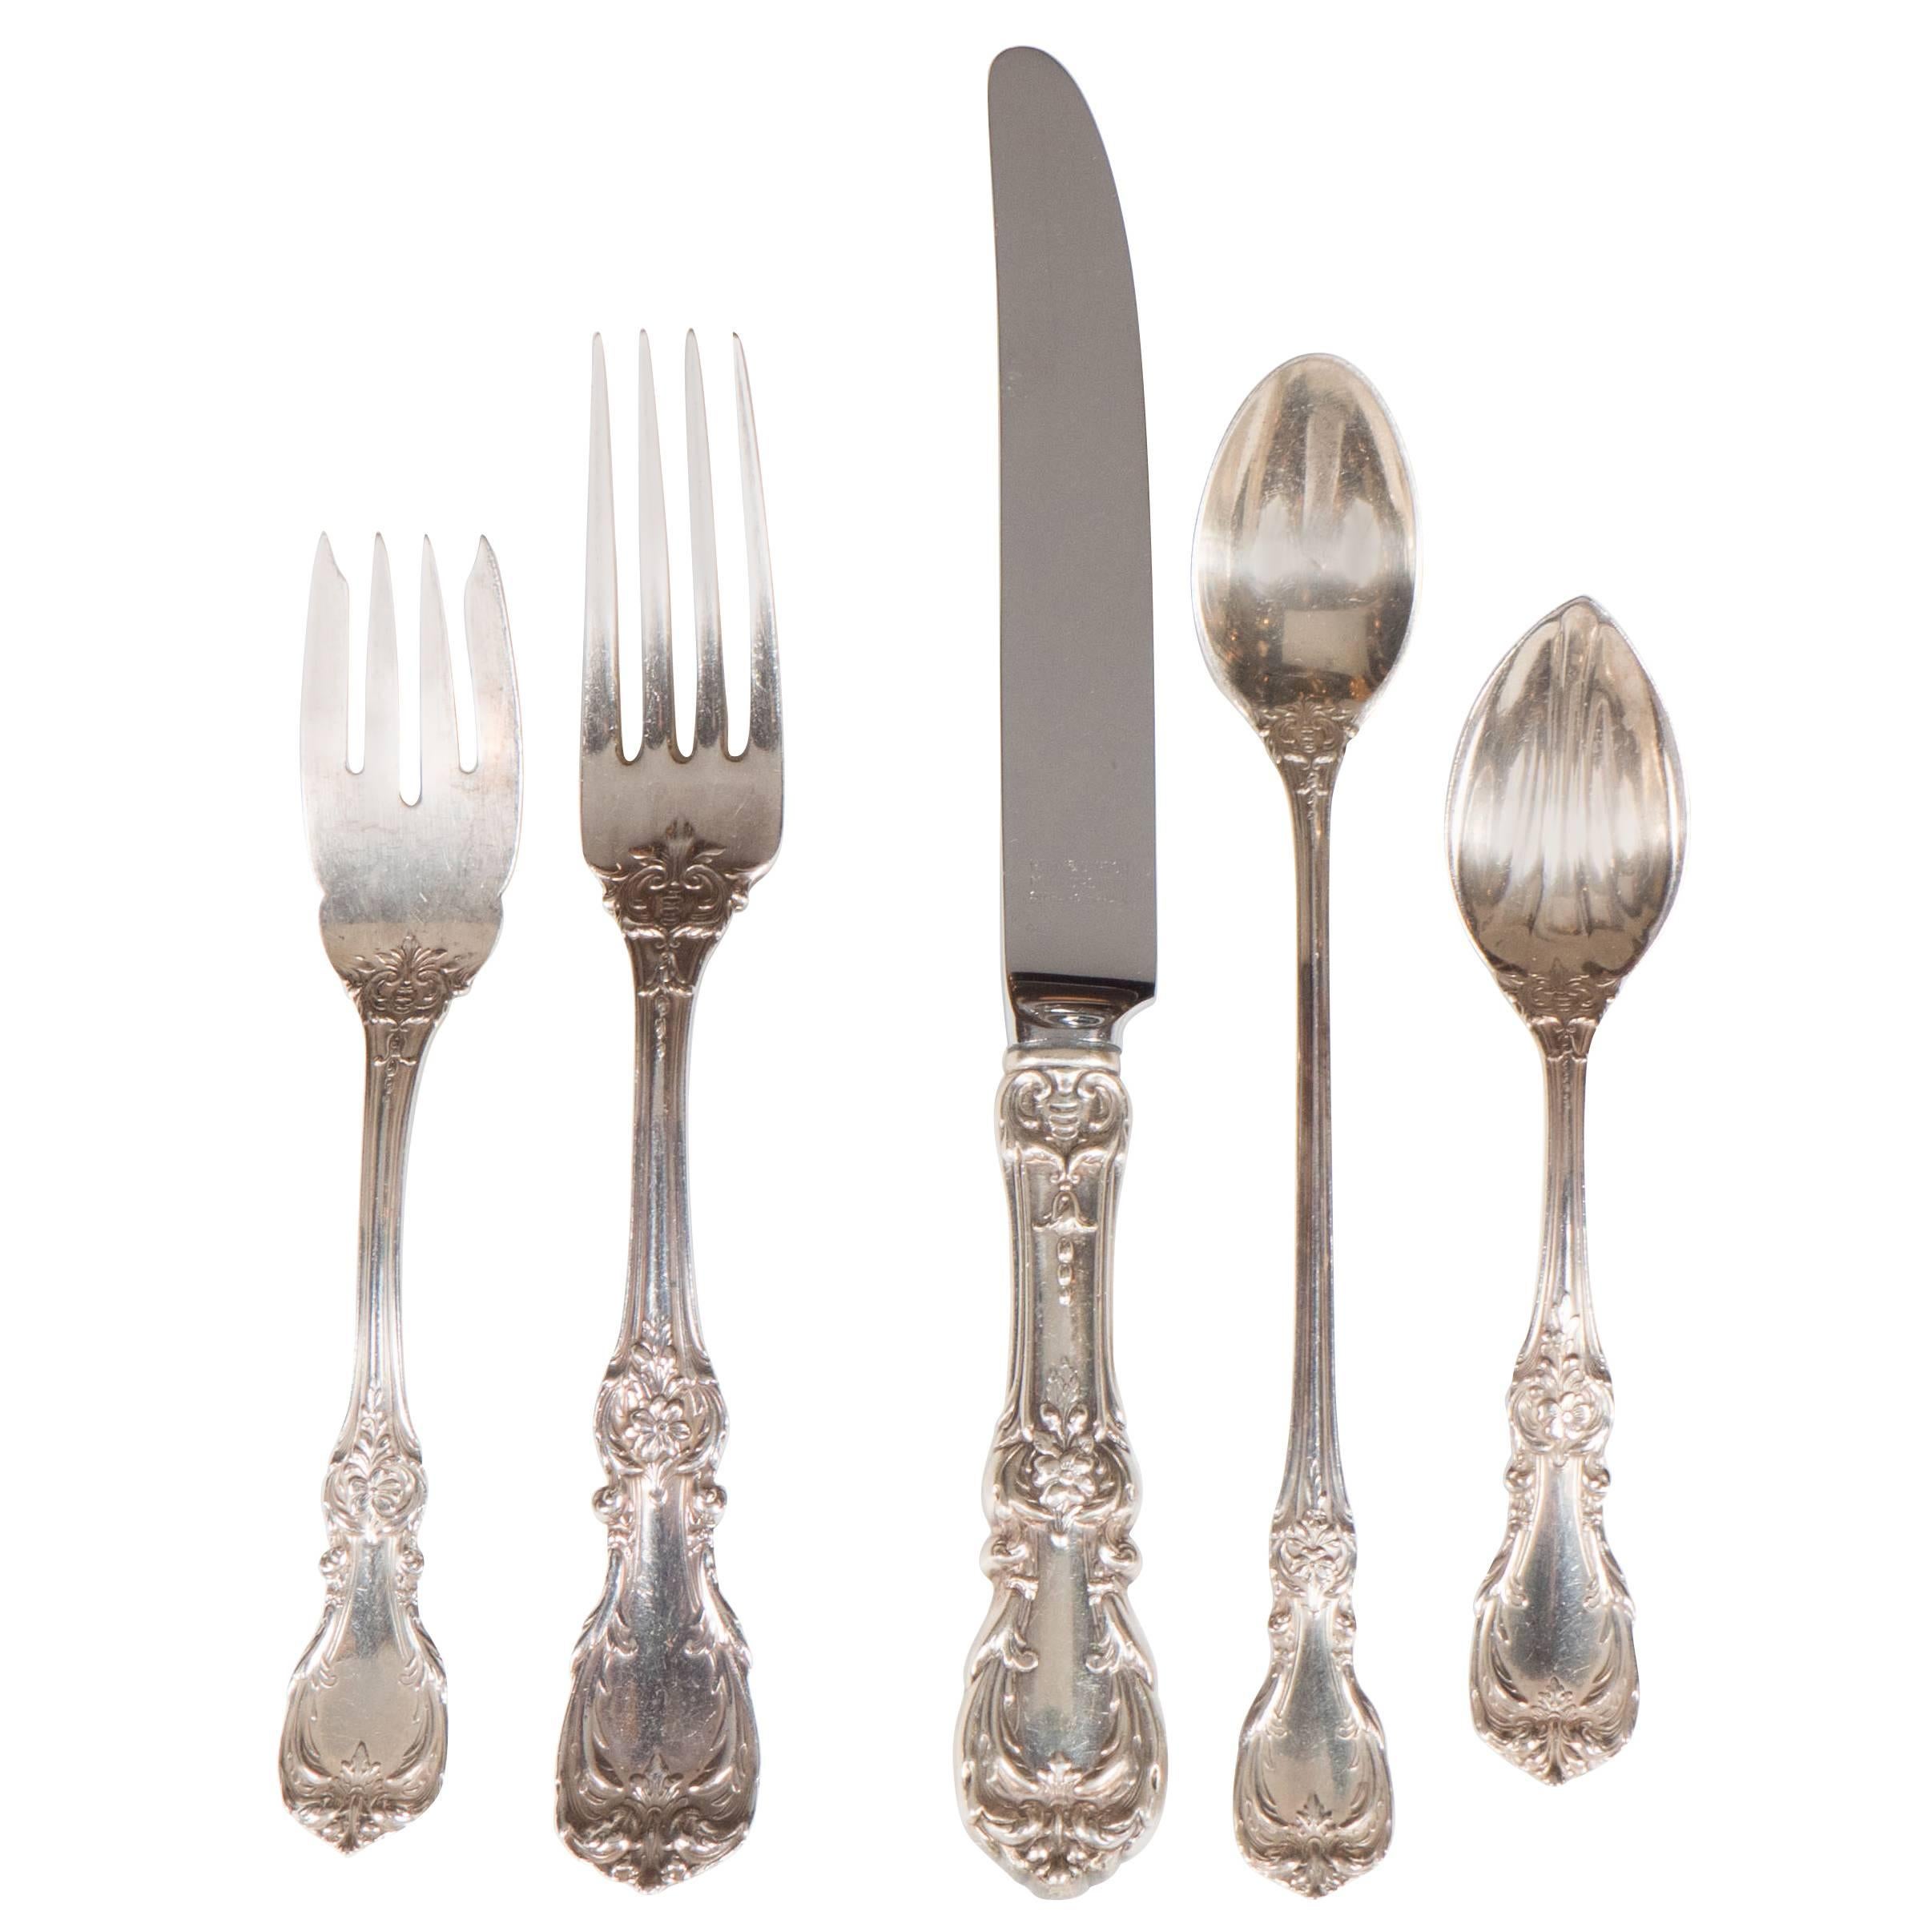 Sterling Silver Flatware "Burgundy" Luncheon Service for 12 by Reed & Barton